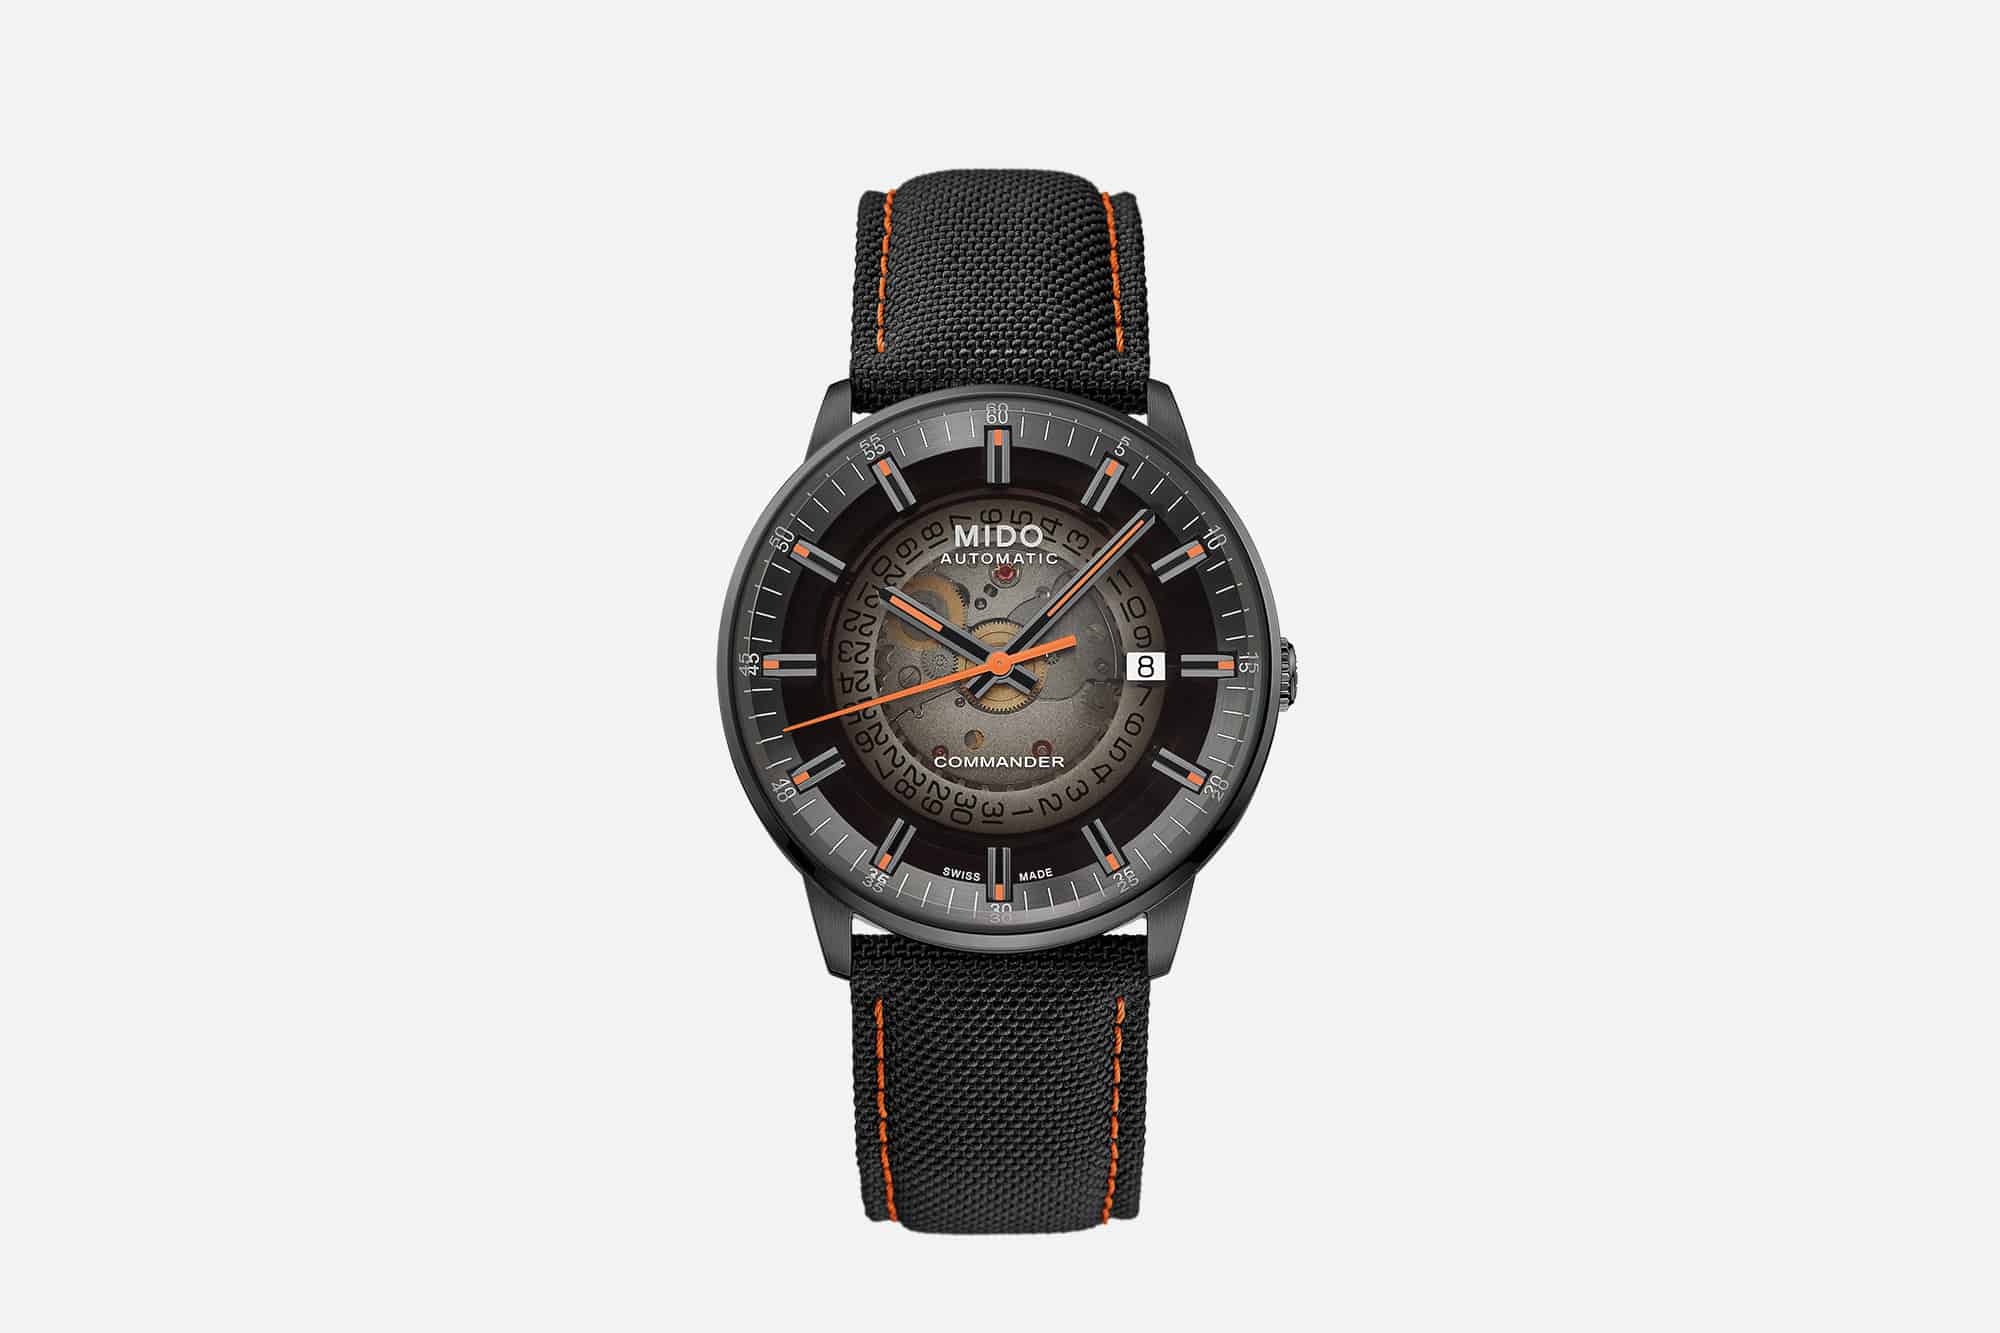 Mido’s New Commander Gradient Offers a View of its Movement From Both Sides